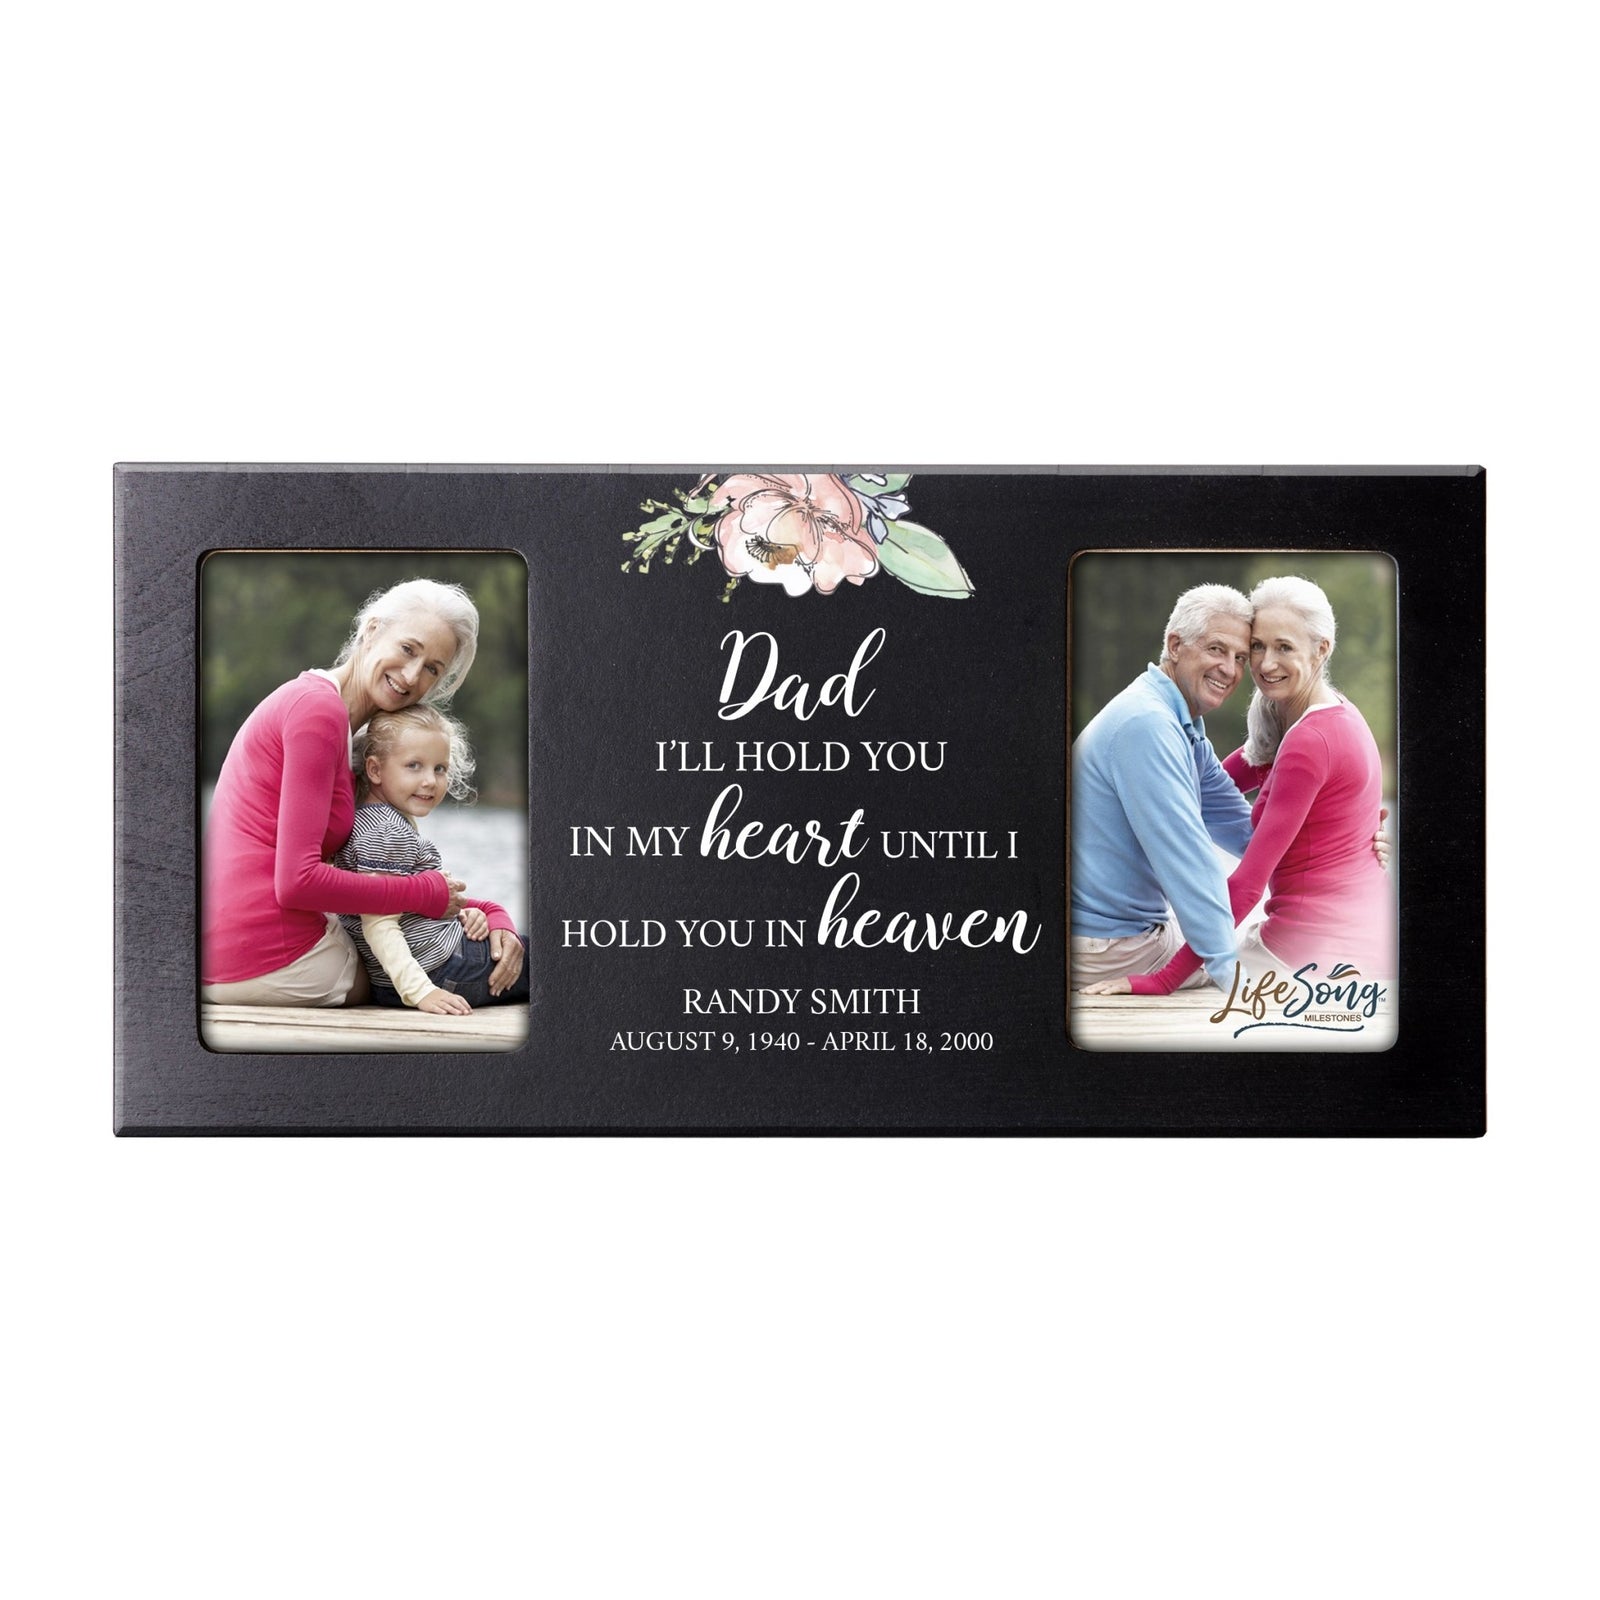 Custom Memorial Picture Frame 16x8in Holds Two 4x6in Photos - Dad, I’ll Hold You In My - LifeSong Milestones